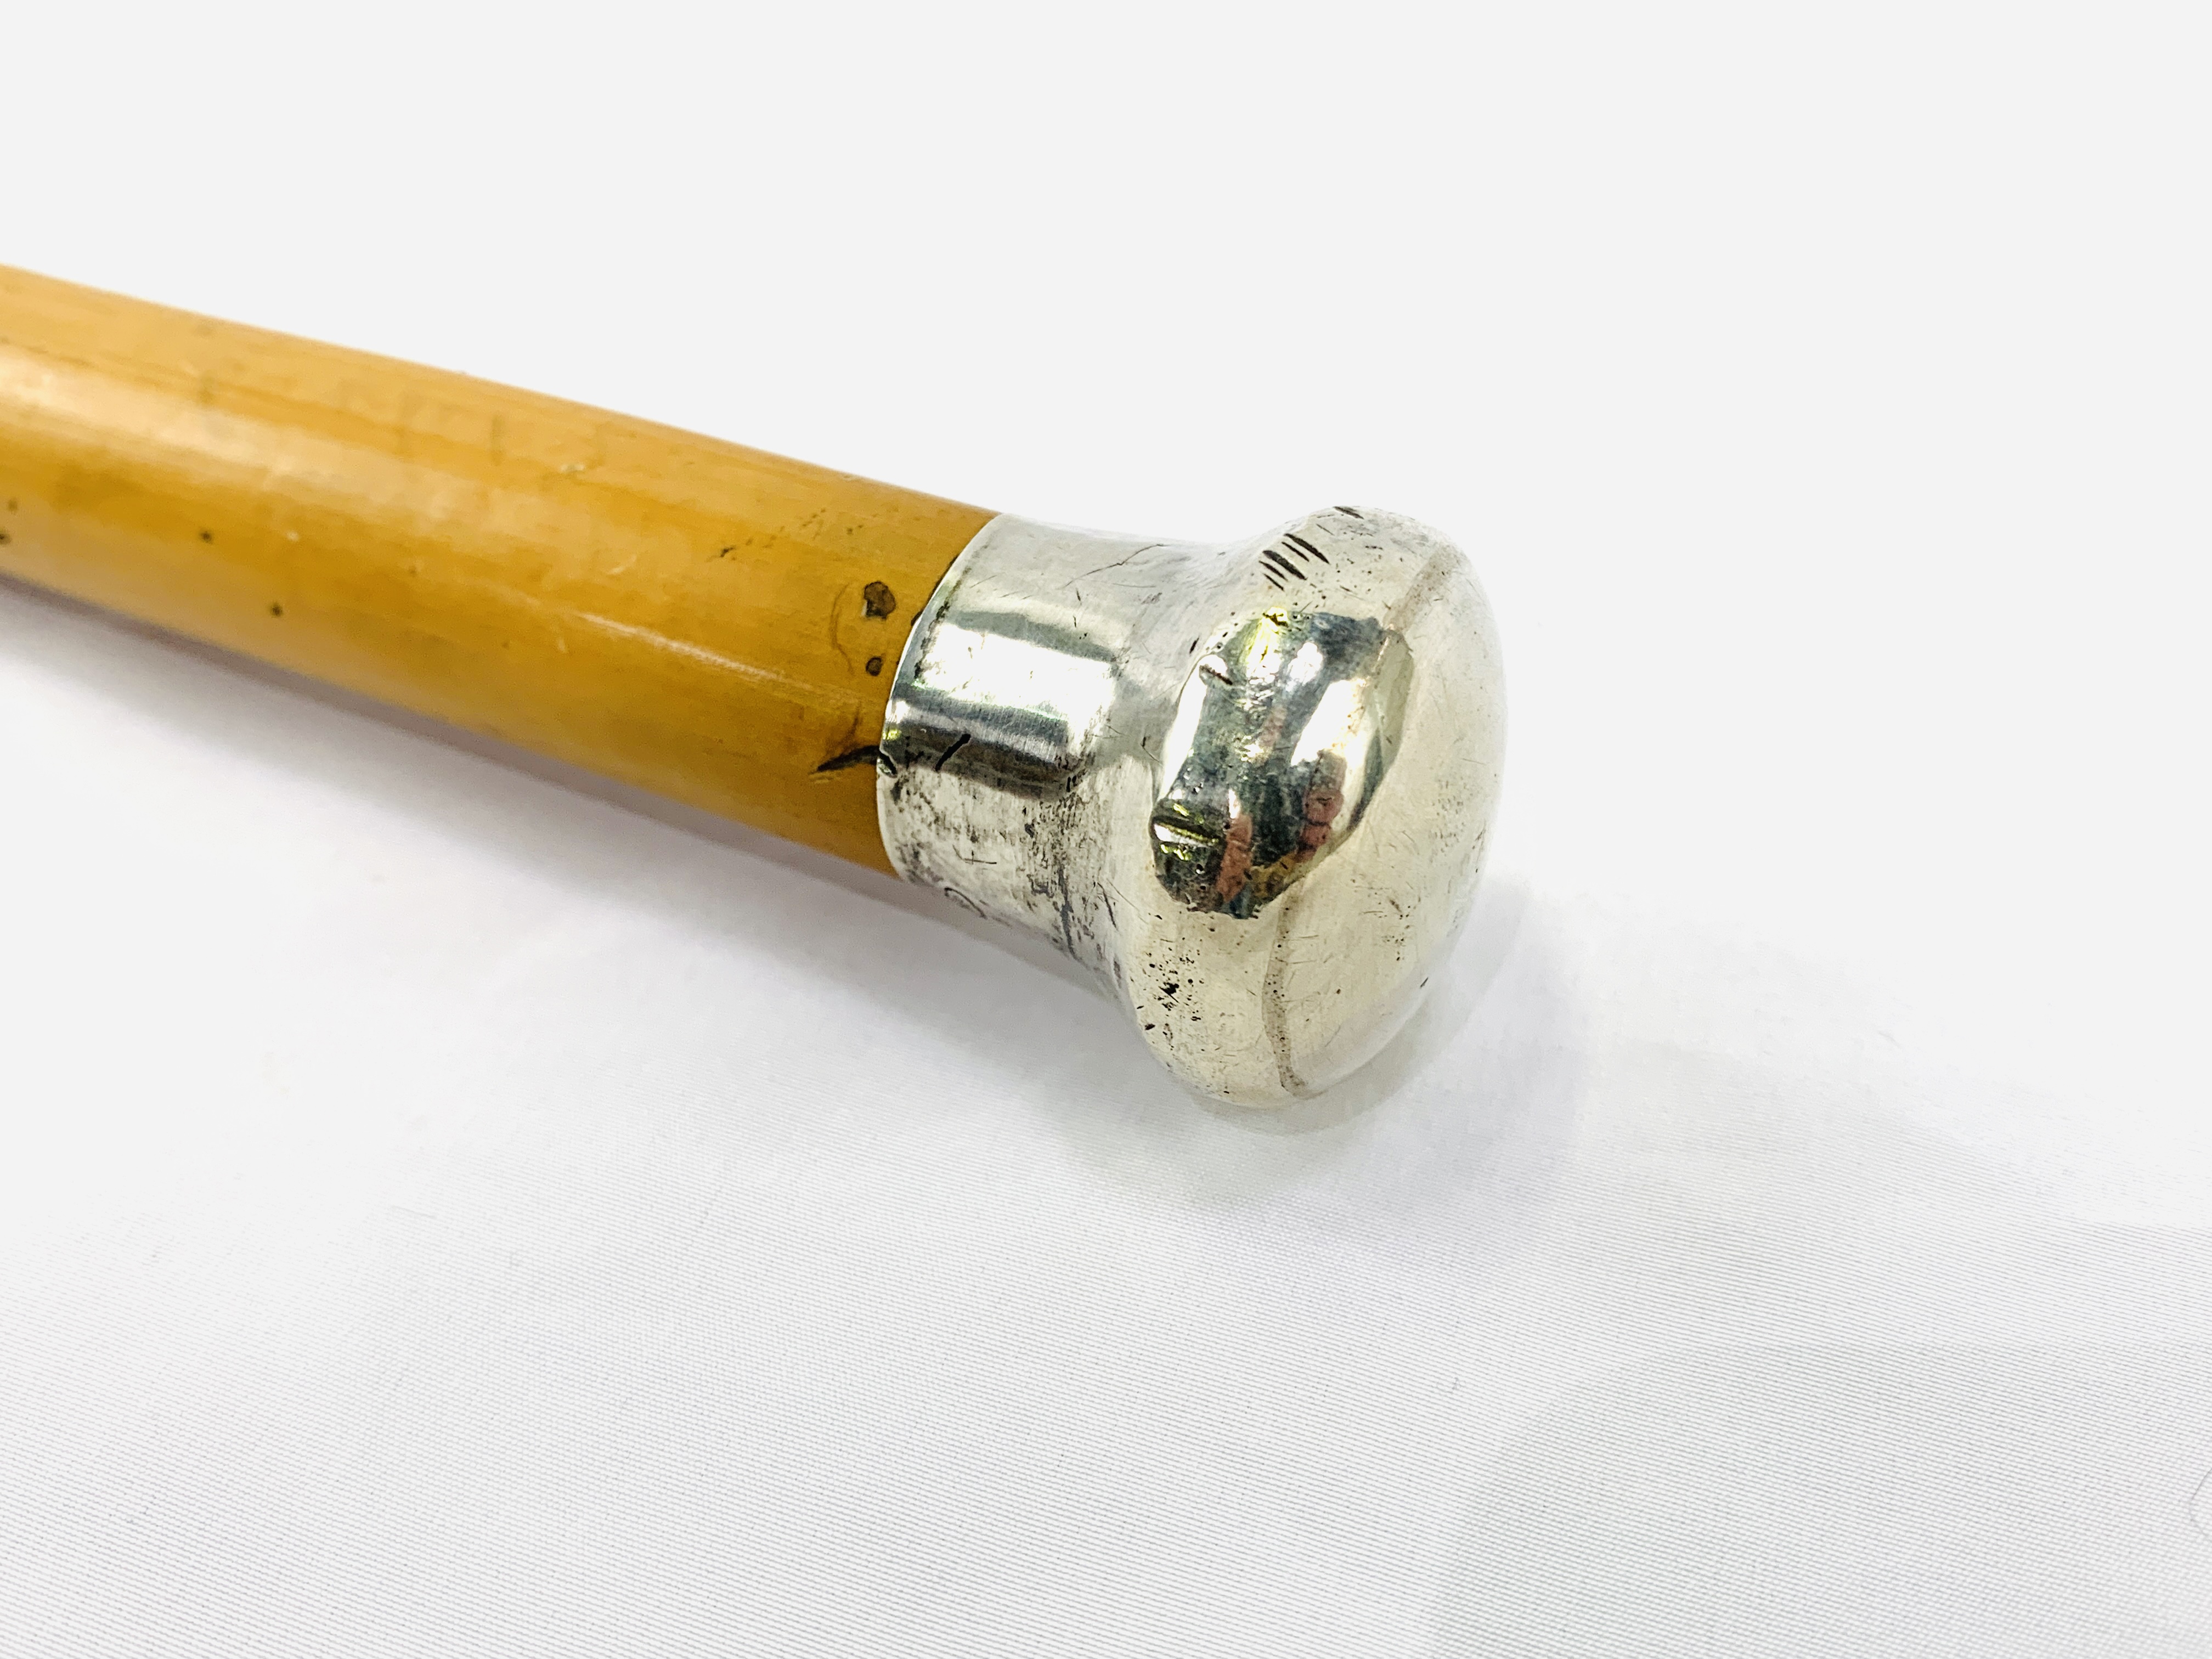 Malacca cane with hallmarked silver top - Image 4 of 4